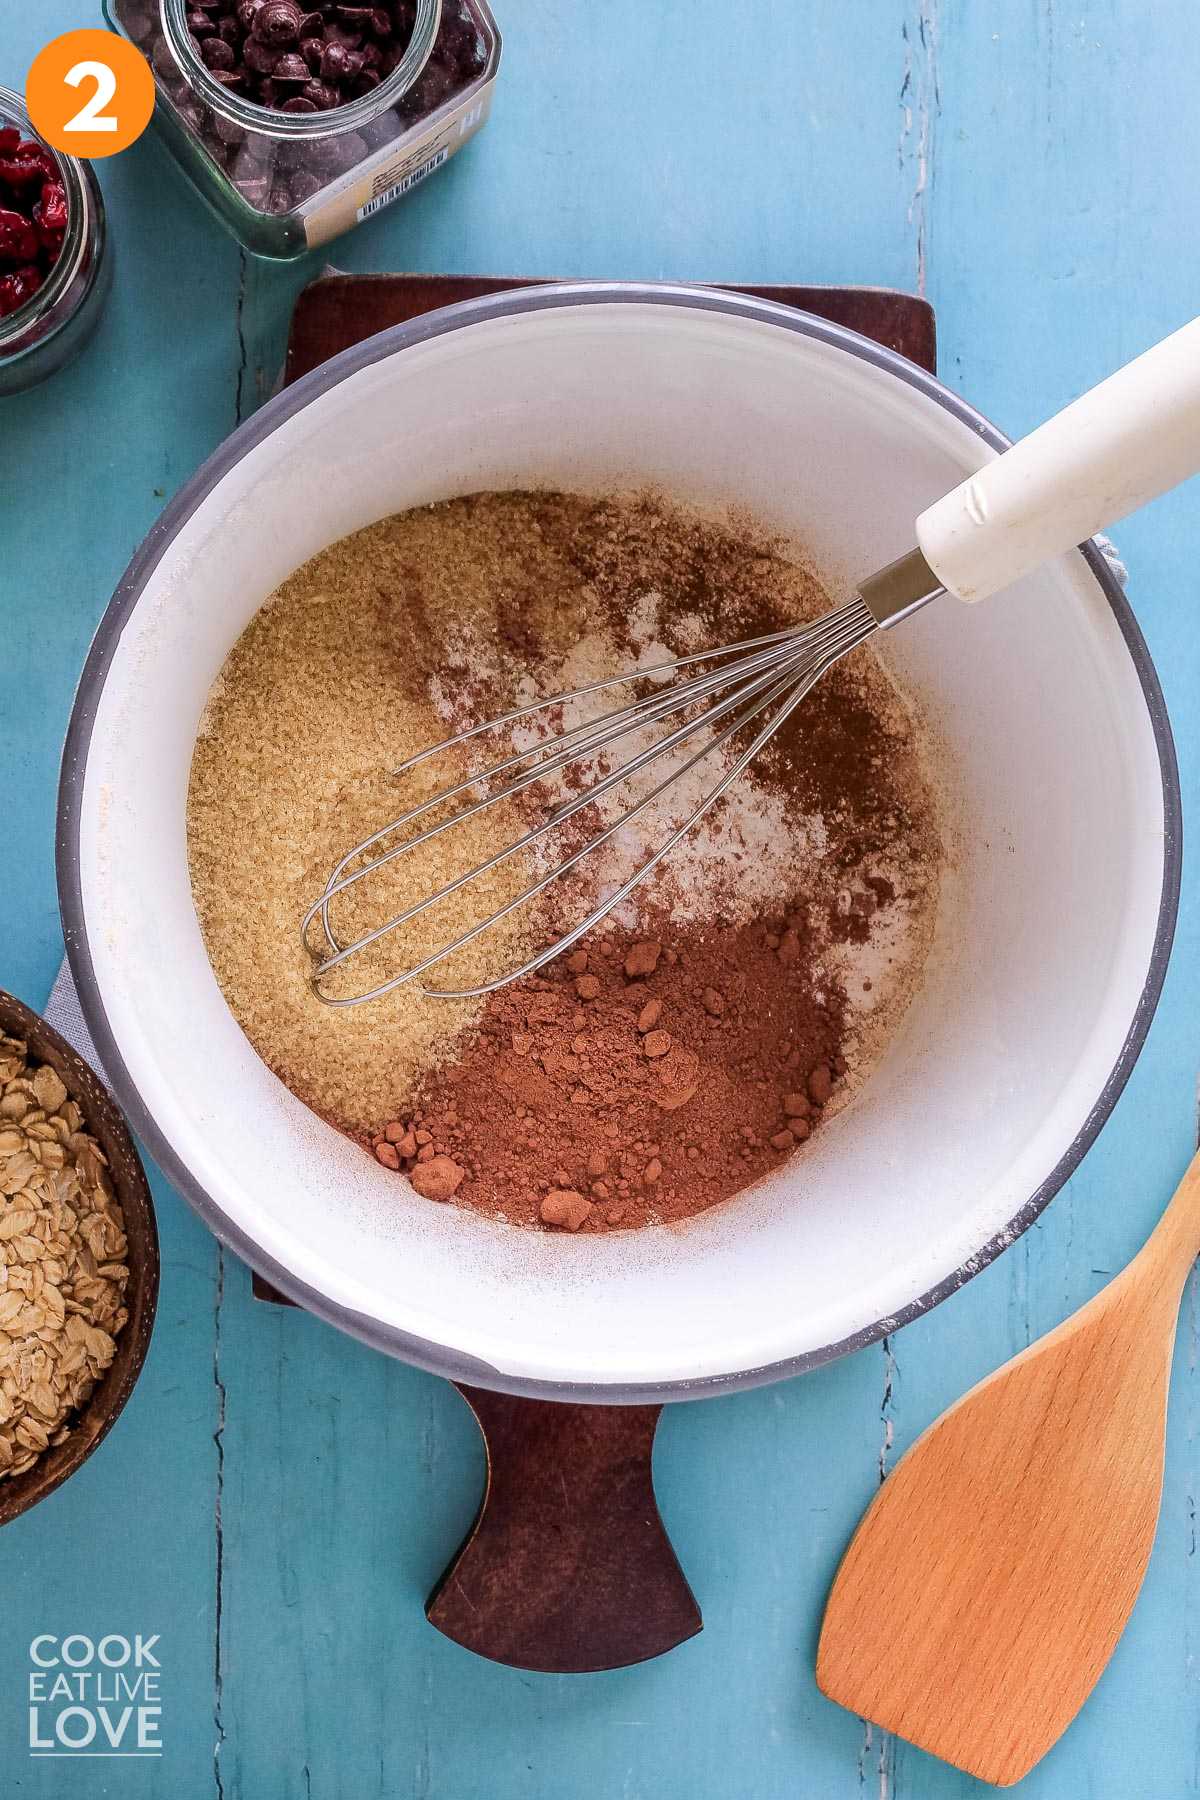 Dry ingredients are combined in a white bowl with a whisk to mix.